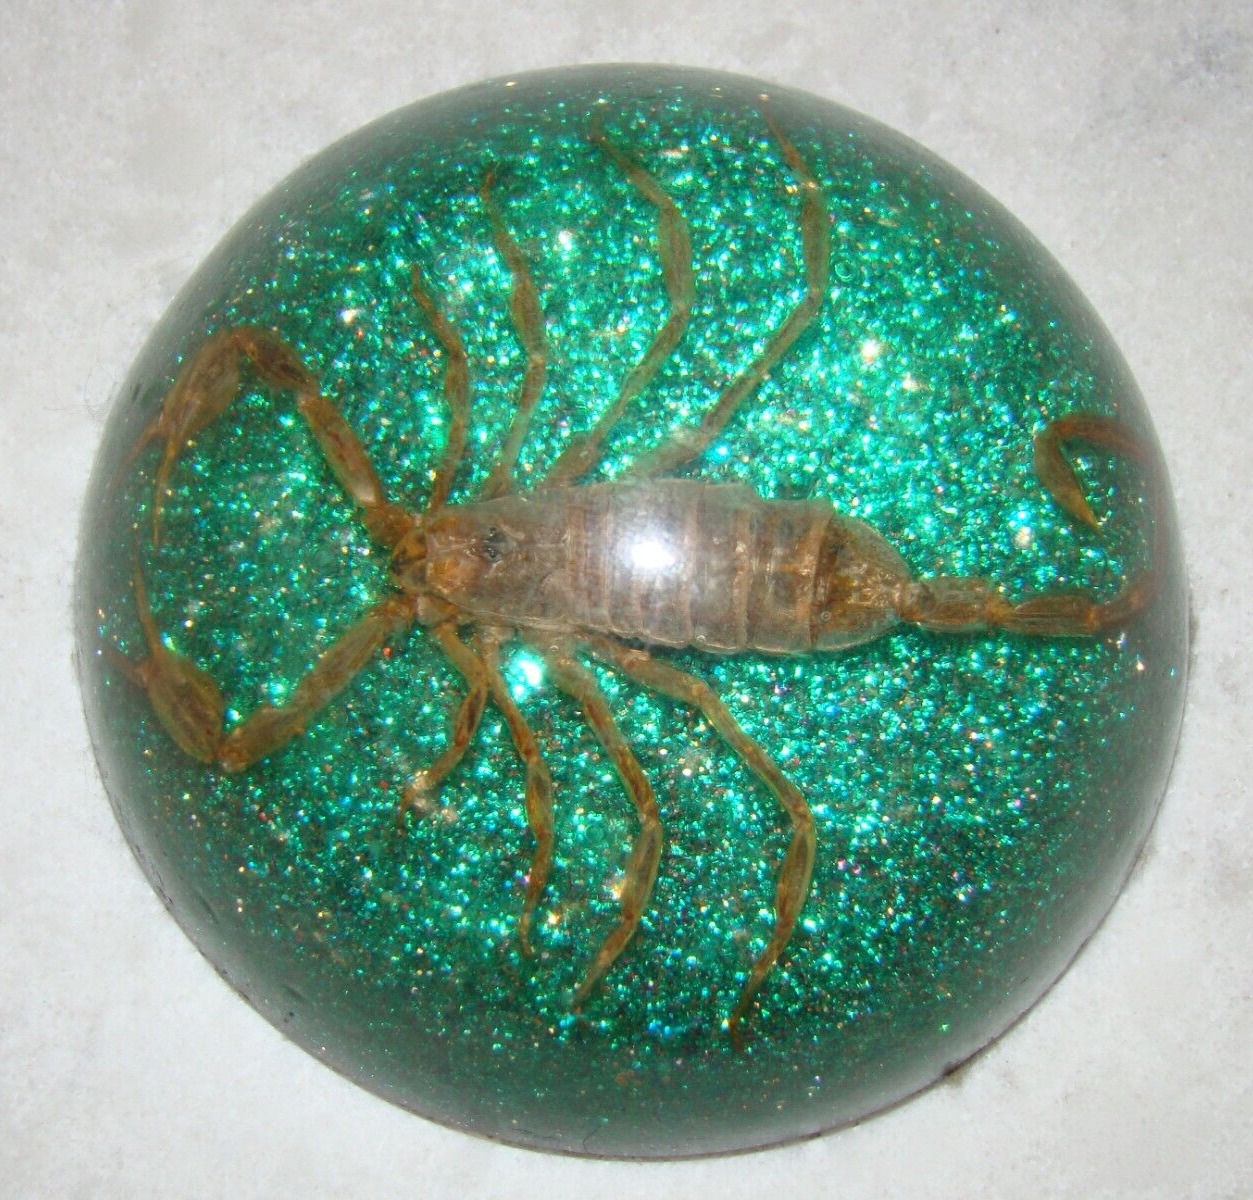 Vintage Large Scorpion in Green Glitter Lucite Dome Paperweight 3.5”